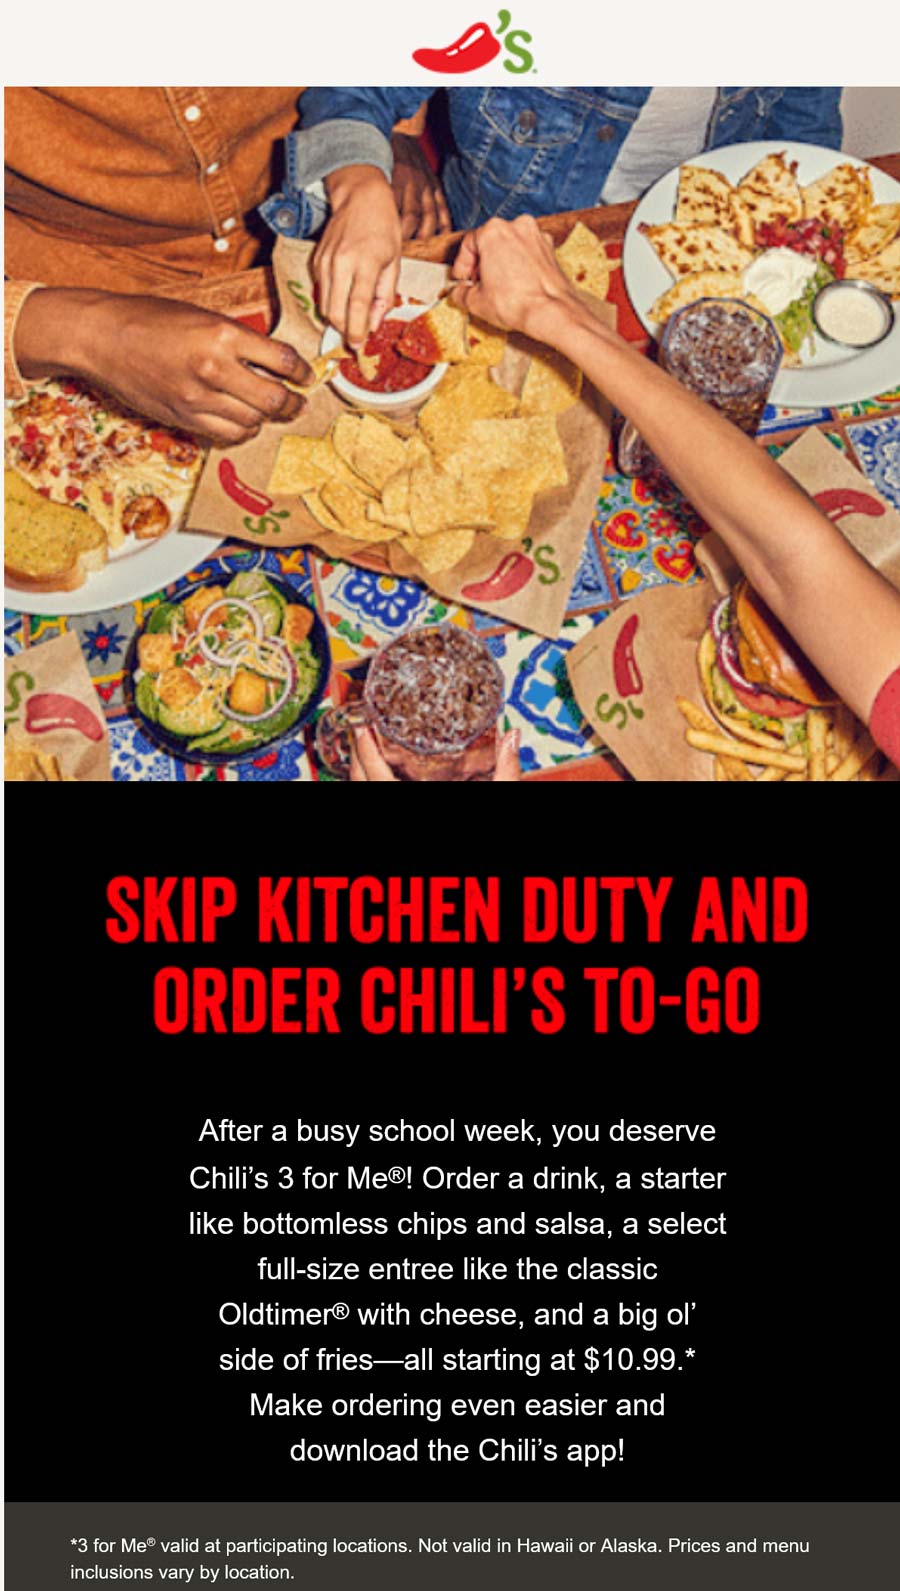 Chilis restaurants Coupon  Drink + starter + entree = $11 3-for-me at Chilis #chilis 